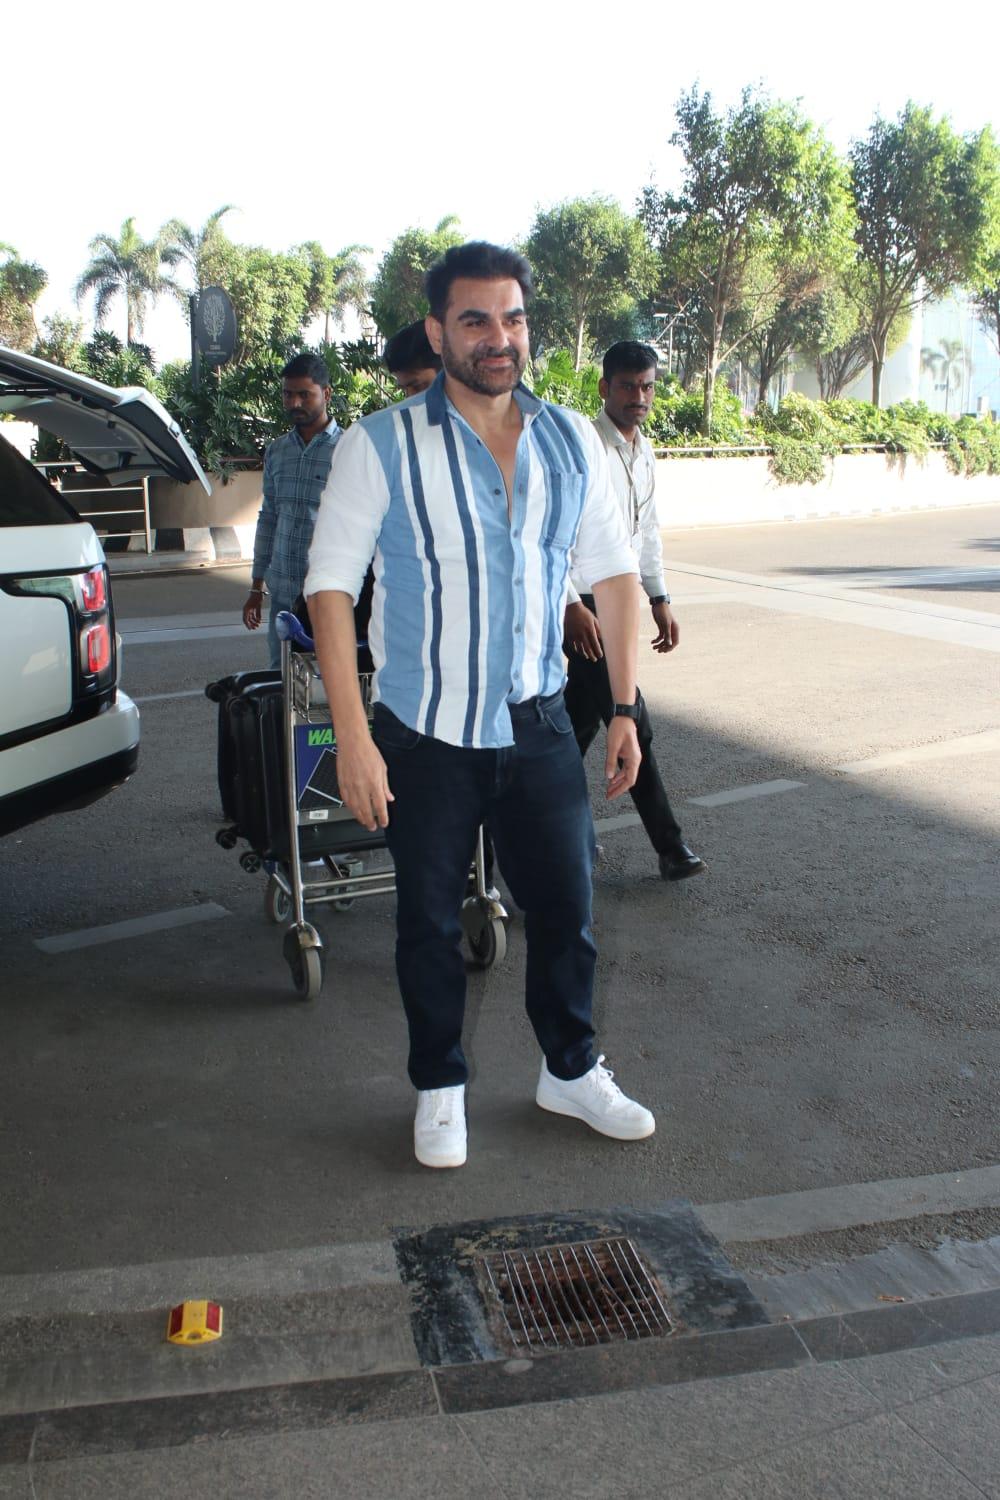 Arbaaz Khan was snapped at the airport as he jetted off.